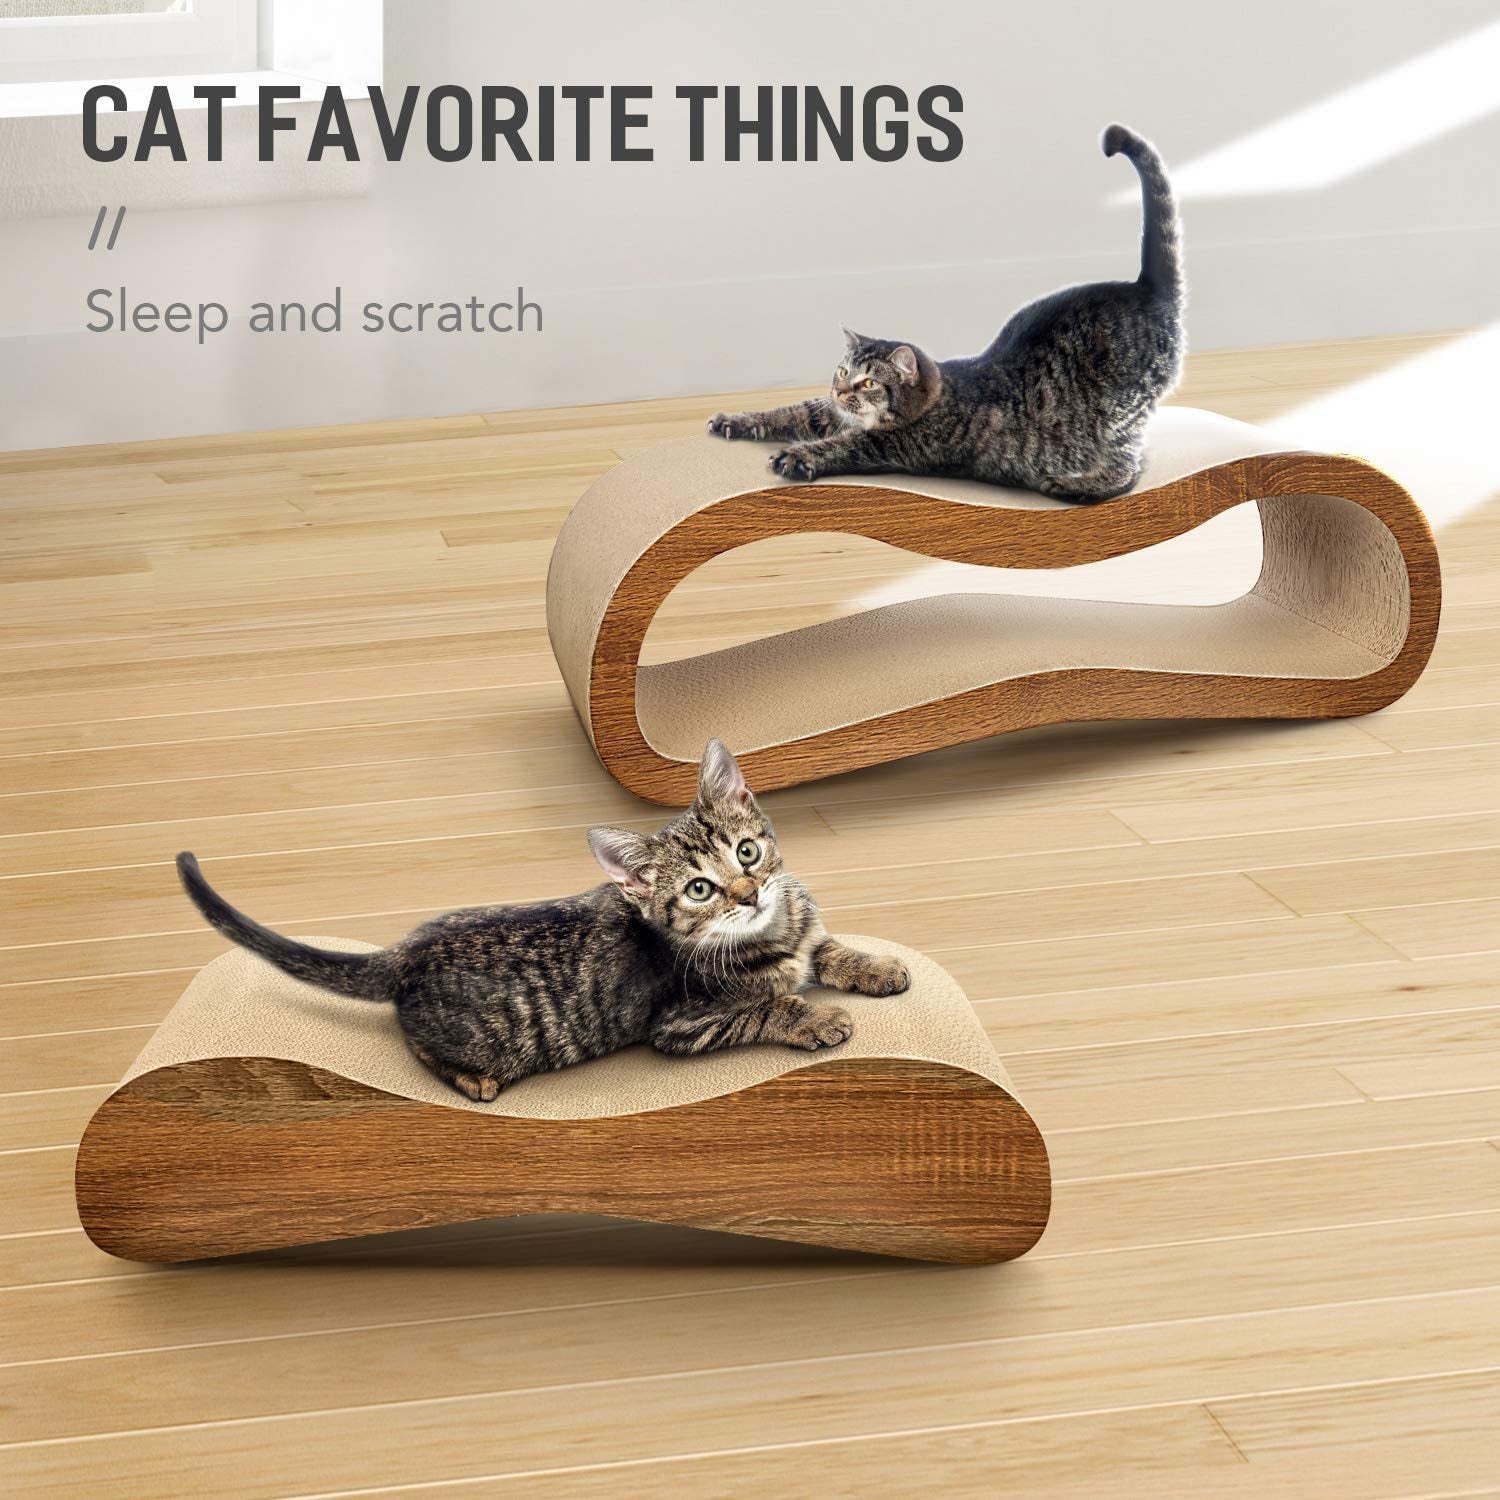 FluffyDream 2 in 1 Cat Scratcher Cardboard Lounge Bed, Cat Scratching Post, Durable Board Pads Prevents Furniture Damage,Large - Tonkn